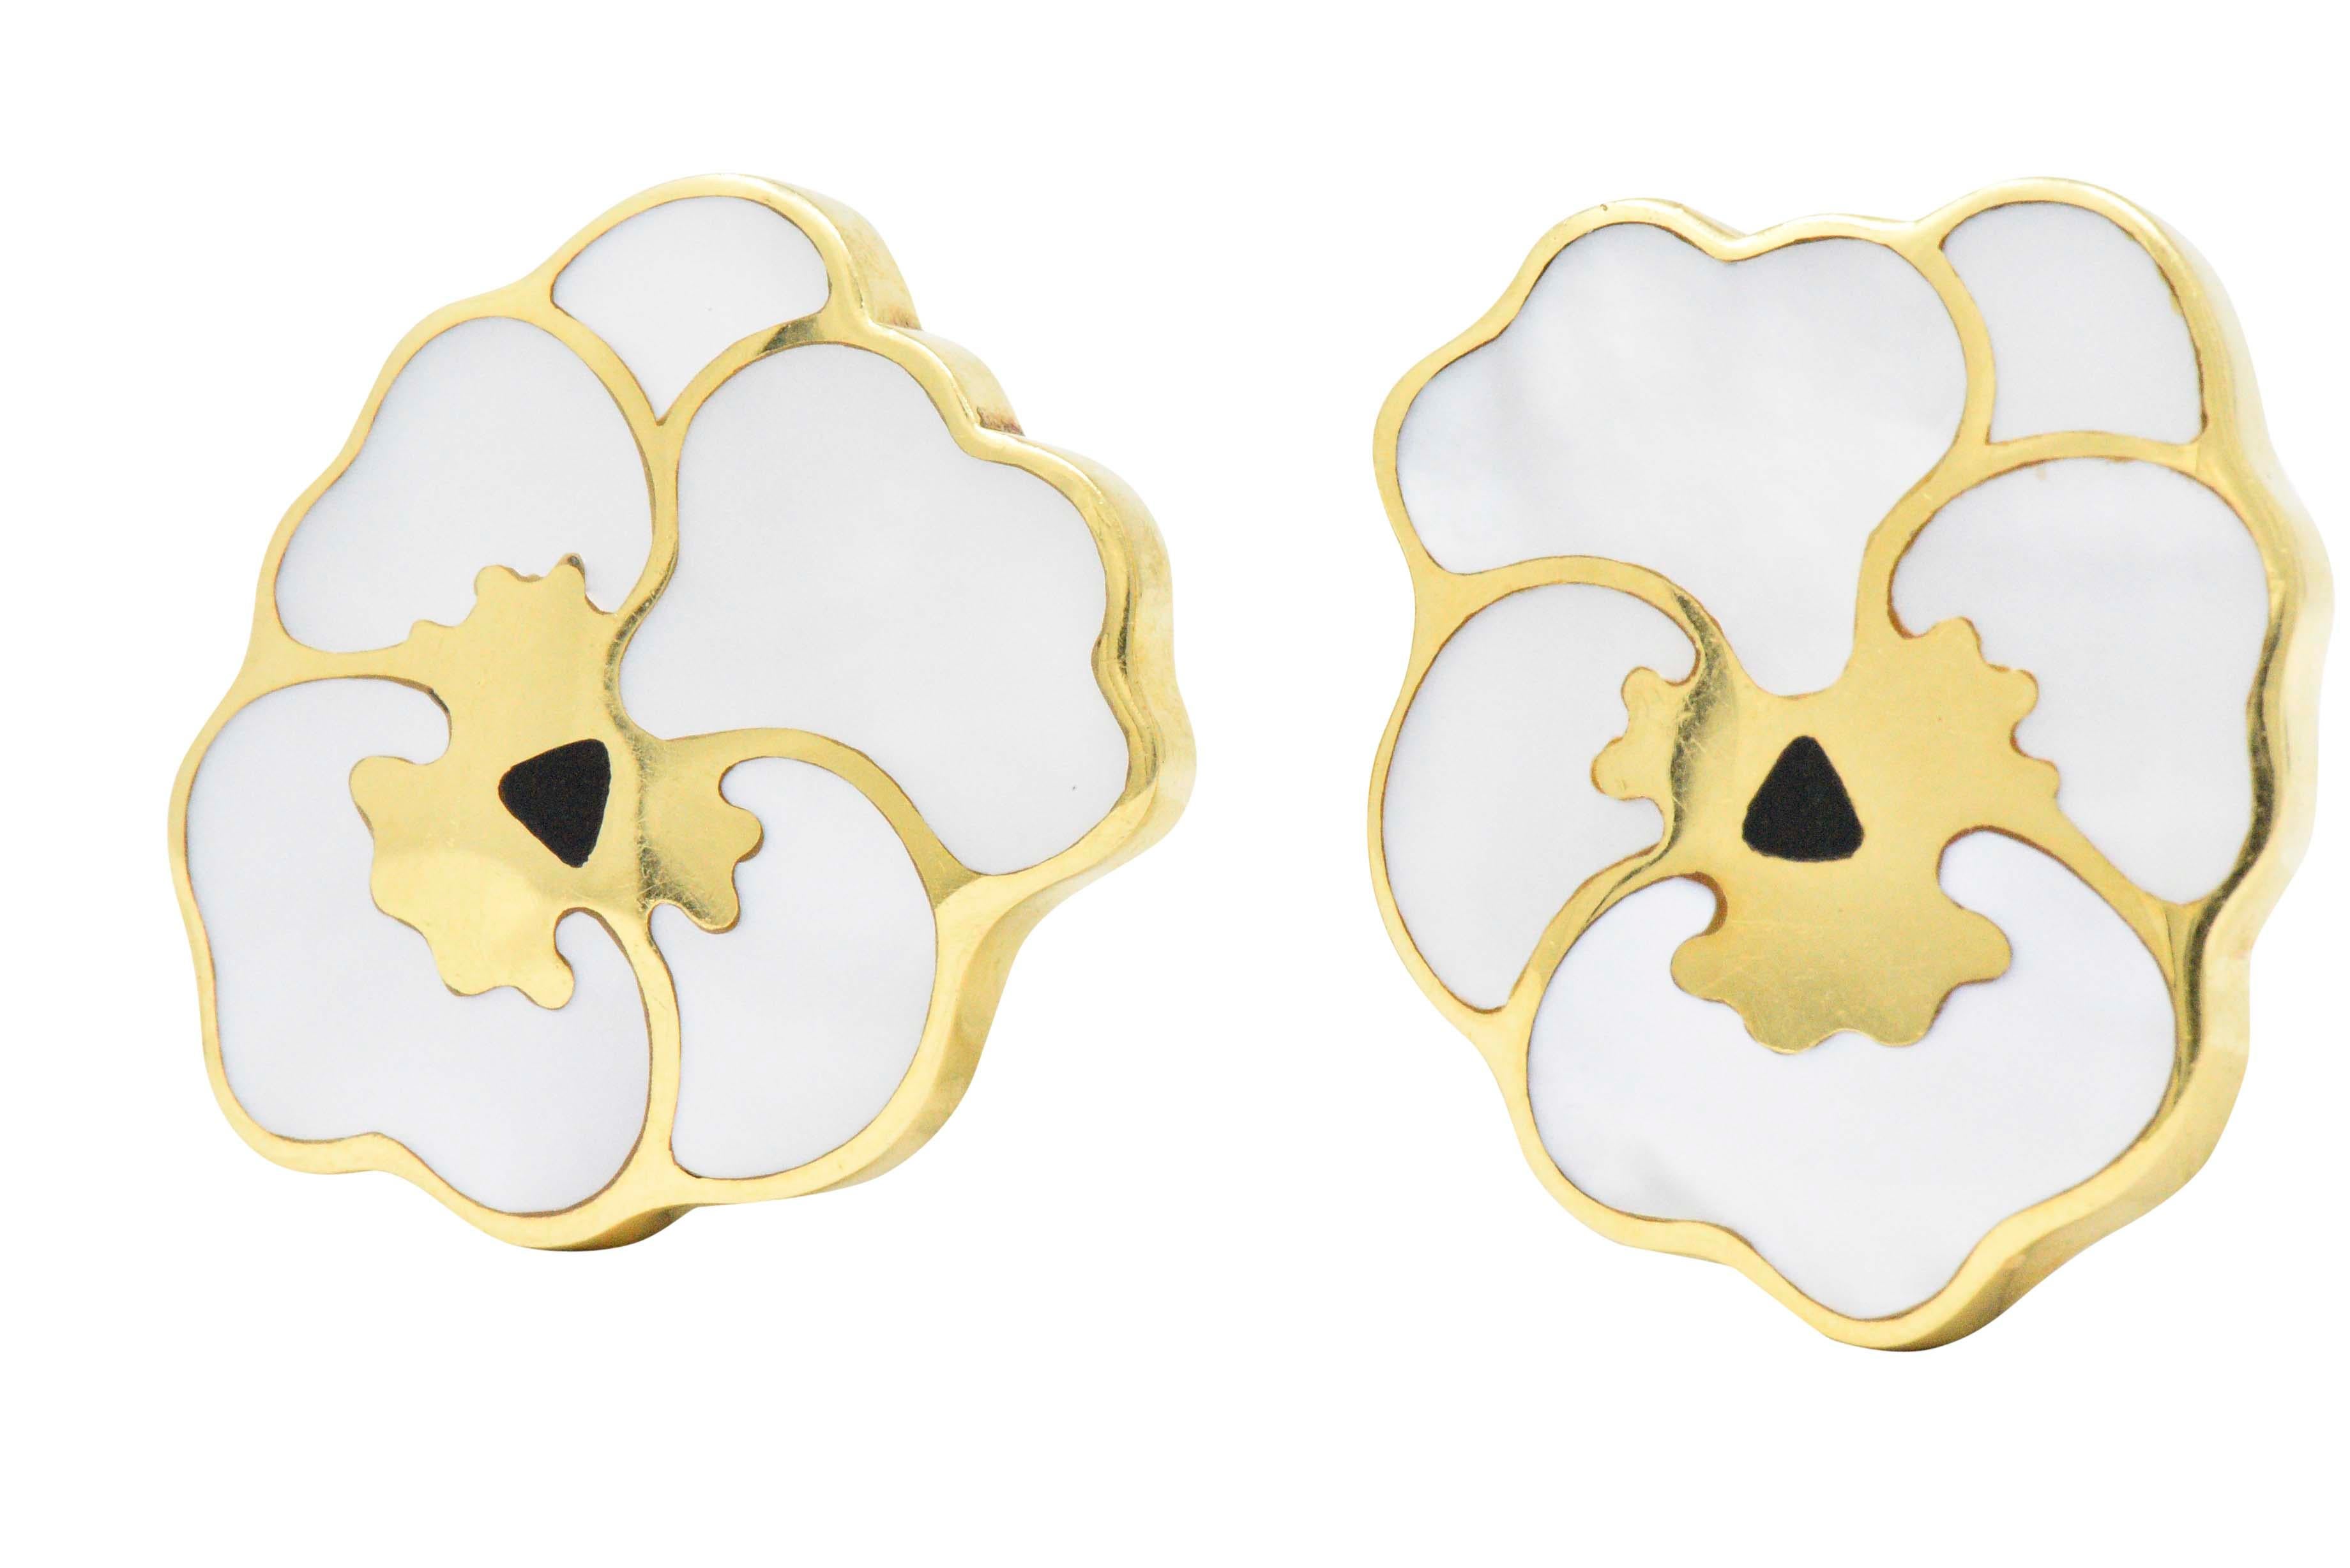 Designed as pansies with inlaid mother-of-pearl petals 

With an onyx pistil and high polished gold throughout

Designed by Angela Cummings

Signed T & Co

With hinged omega backs and later added post findings

Measuring: Approx. 1 3/8 x 1 1/8